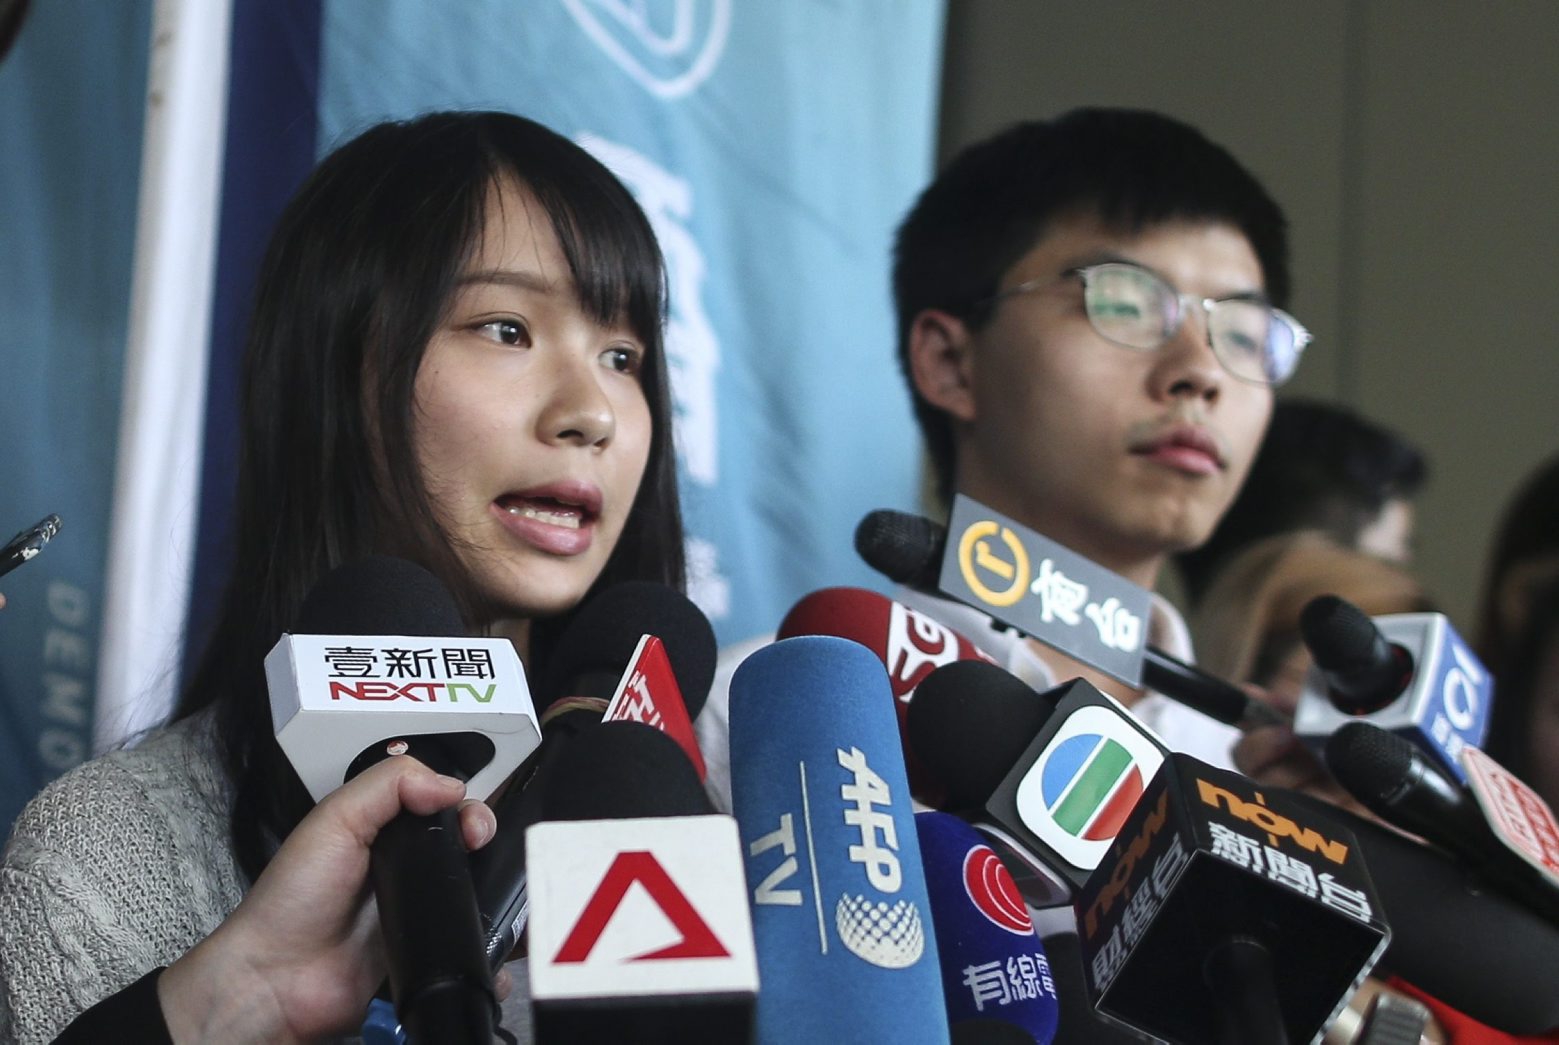 epa07803656 Leaders of Demosisto, a pro-democracy organization promoting self-determination for Hong Kong, Joshua Wong (R) and Agnes Chow (L) speak to the press after they were released on bail in Wan Chai police headquarters, Hong Kong, China, 30 August 2019. According to reports on 30 August 2019, political activist and Demosisto leader Joshua Wong and fellow Demosisto member Agnes Chow were arrested for their involvement in an unlawful assembly during the besiege of the Wan Chai police headquarters on June 21. For over two months, Hong Kong has been gripped by mass protests, which began in June over a now-suspended extradition bill to China and have developed into an anti-government movement.  EPA/JEROME FAVRE CHINA HONG KONG PROTESTS